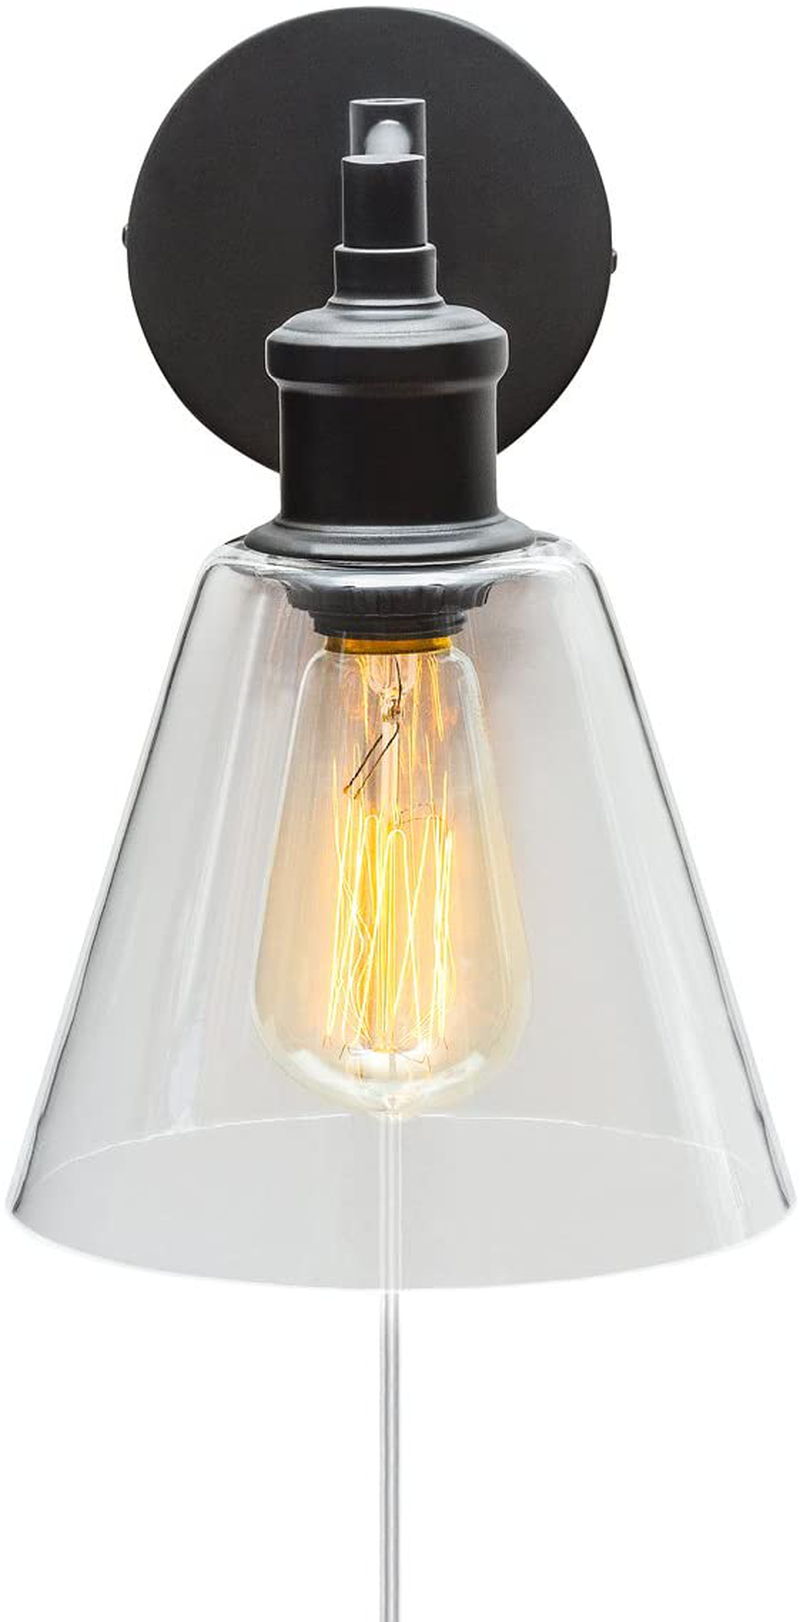 Globe Electric 65311 Leclair, 12", Dark Bronze with Clear Glass